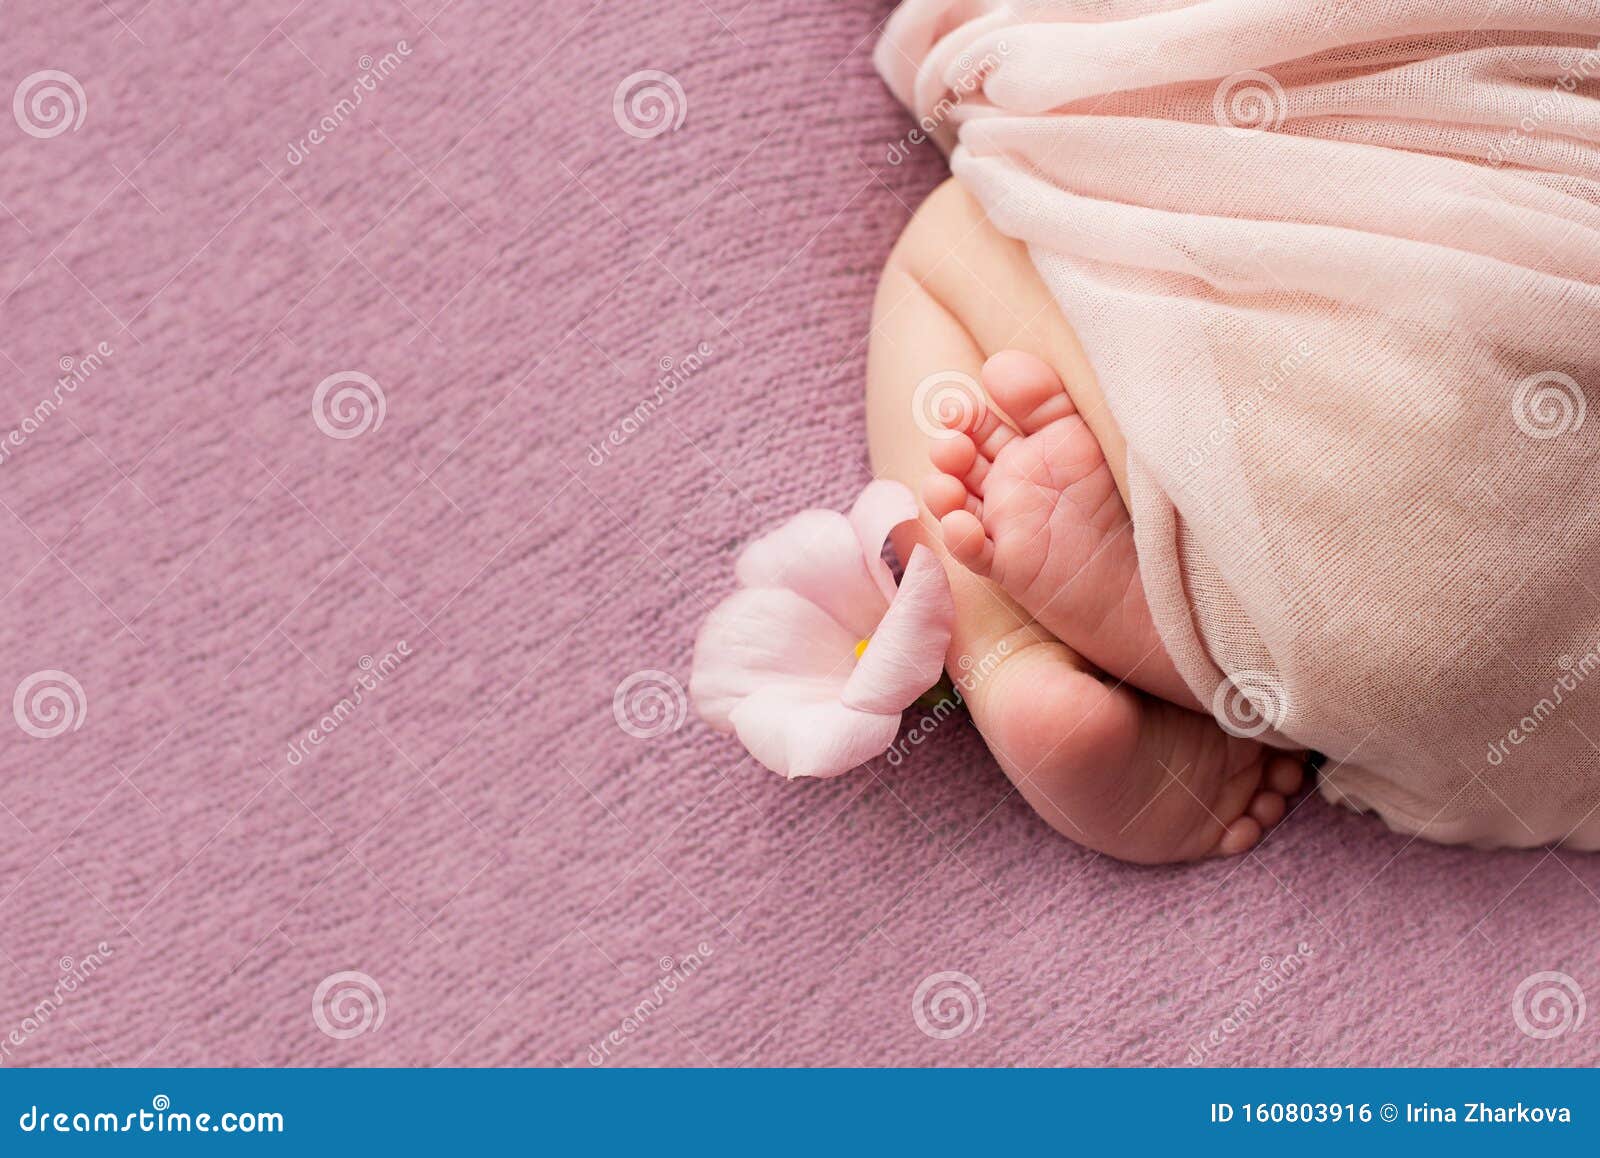 Feet Of The Newborn Baby With Flower Fingers On The Foot Materna